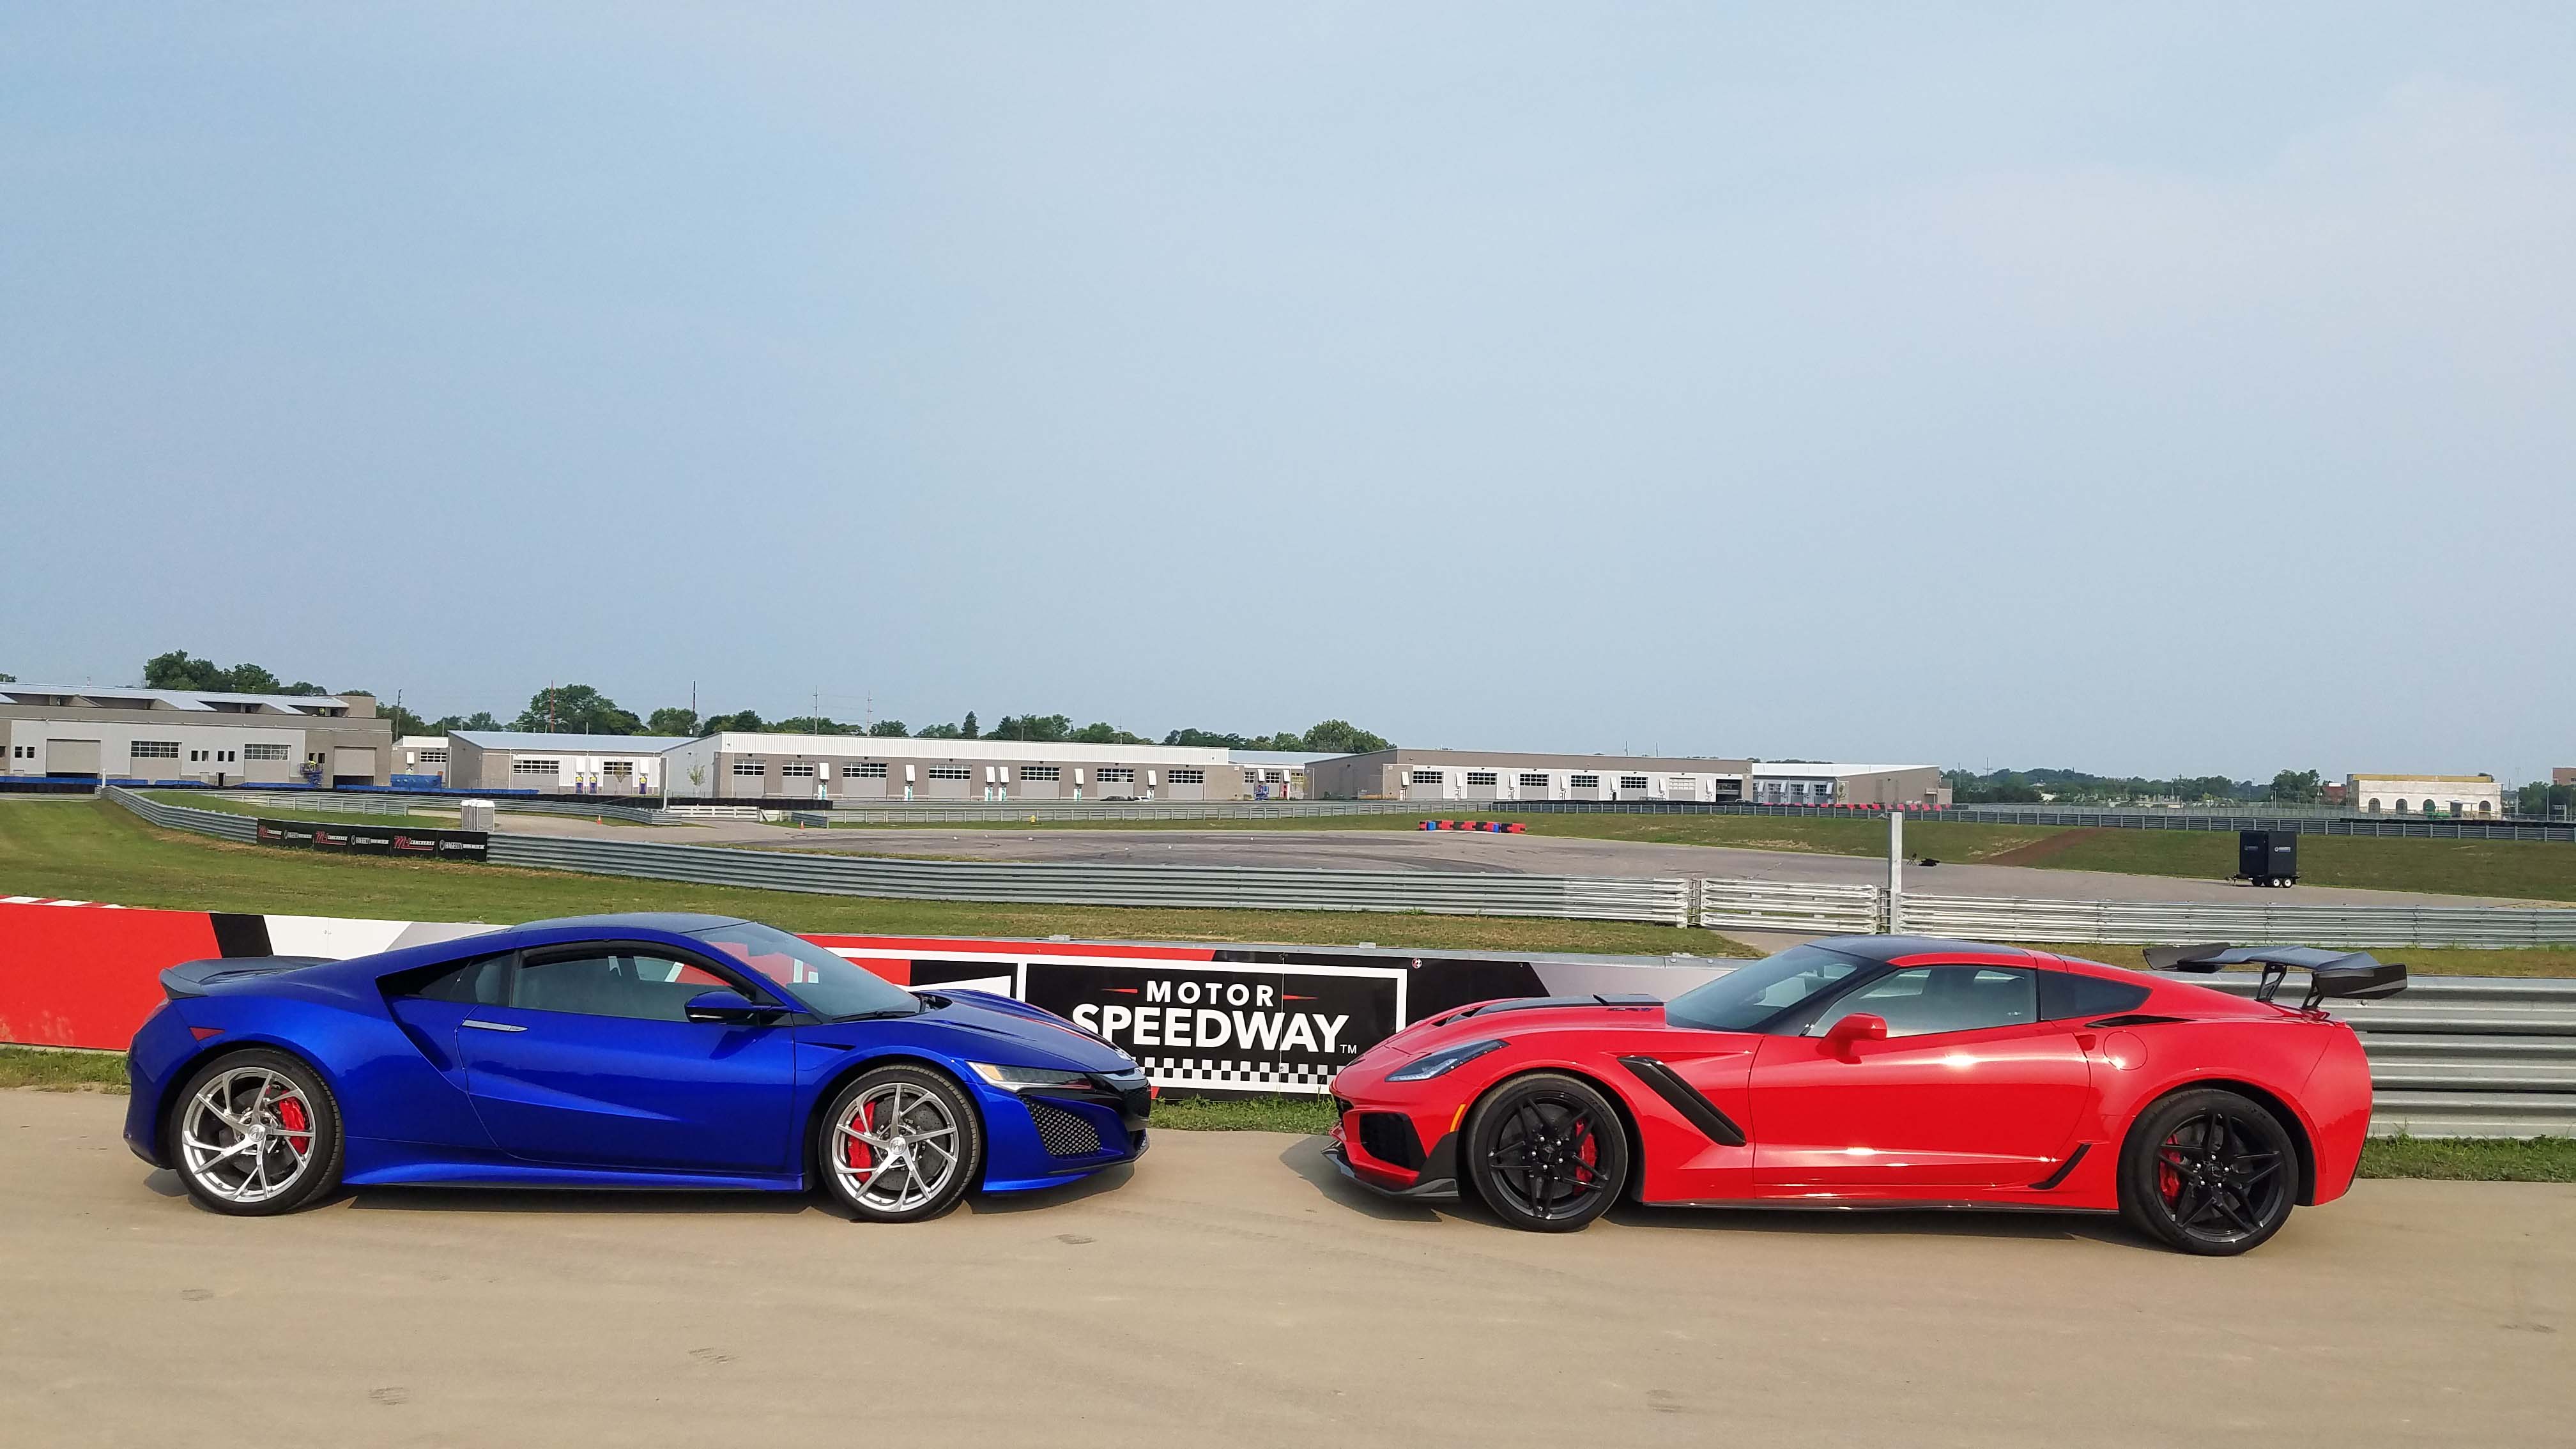 With its more complicated hybrid powertrain, the Acura NSX supercar, left, is $40K more expensive than the $120,000, push-rod V8-powered Chevy Corvette ZR1.